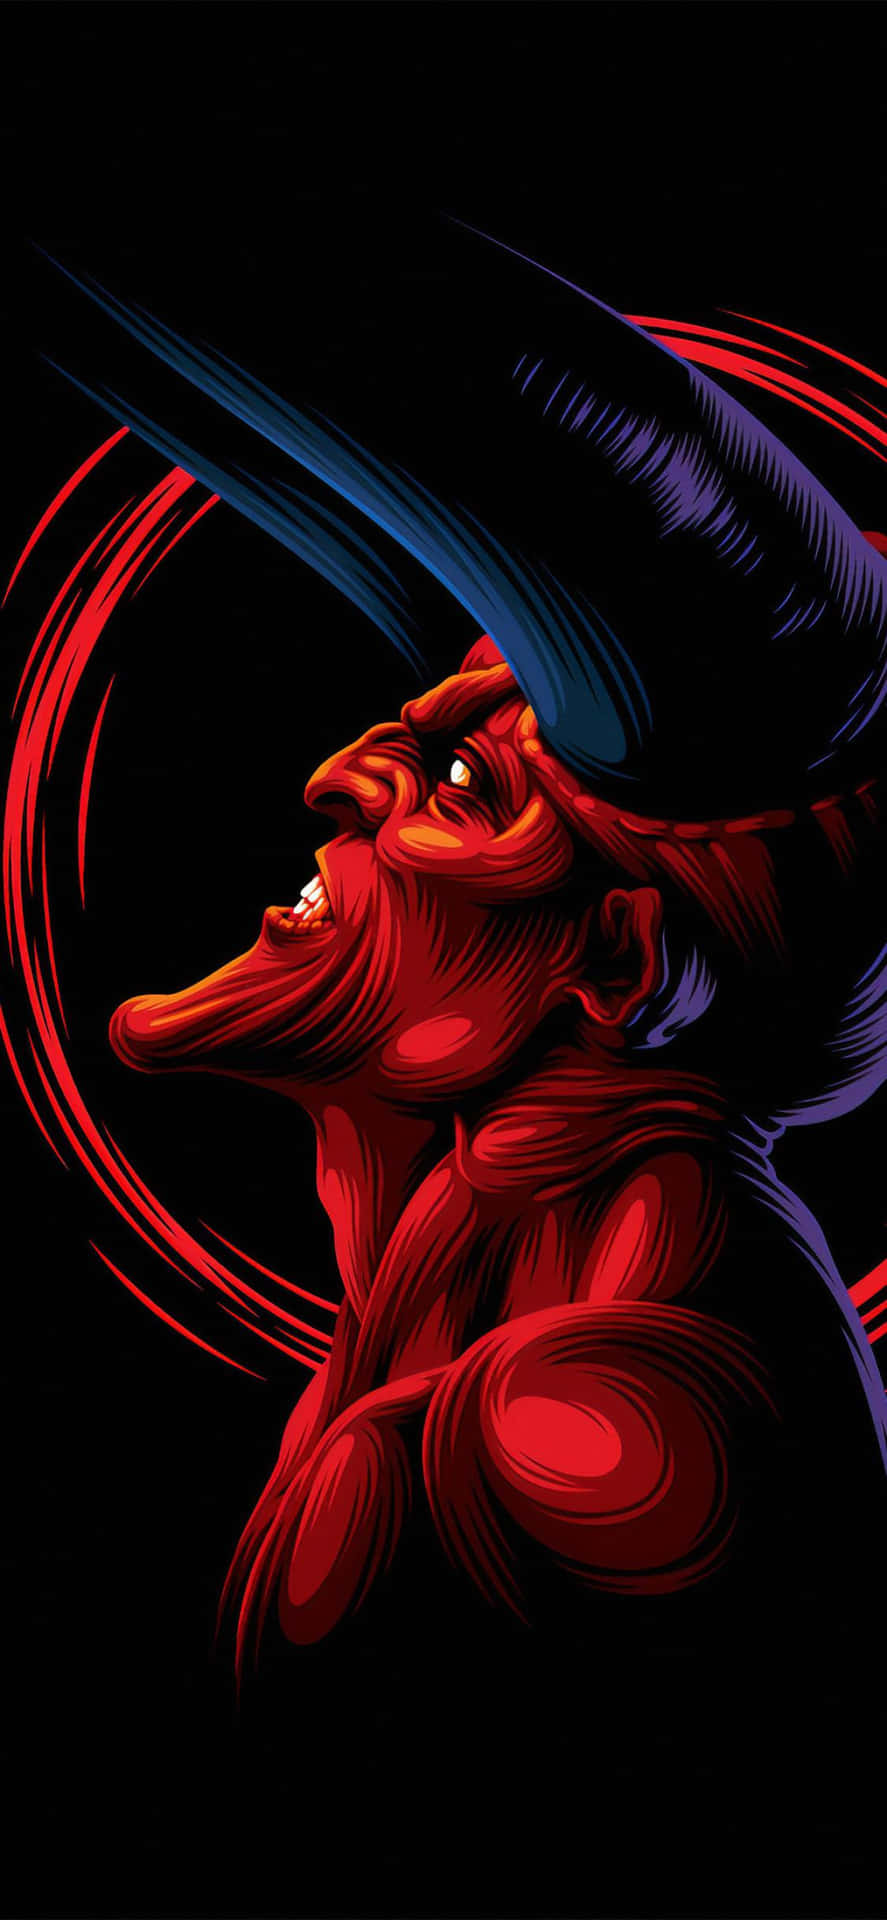 A Devil With A Red Head And A Black Background Wallpaper